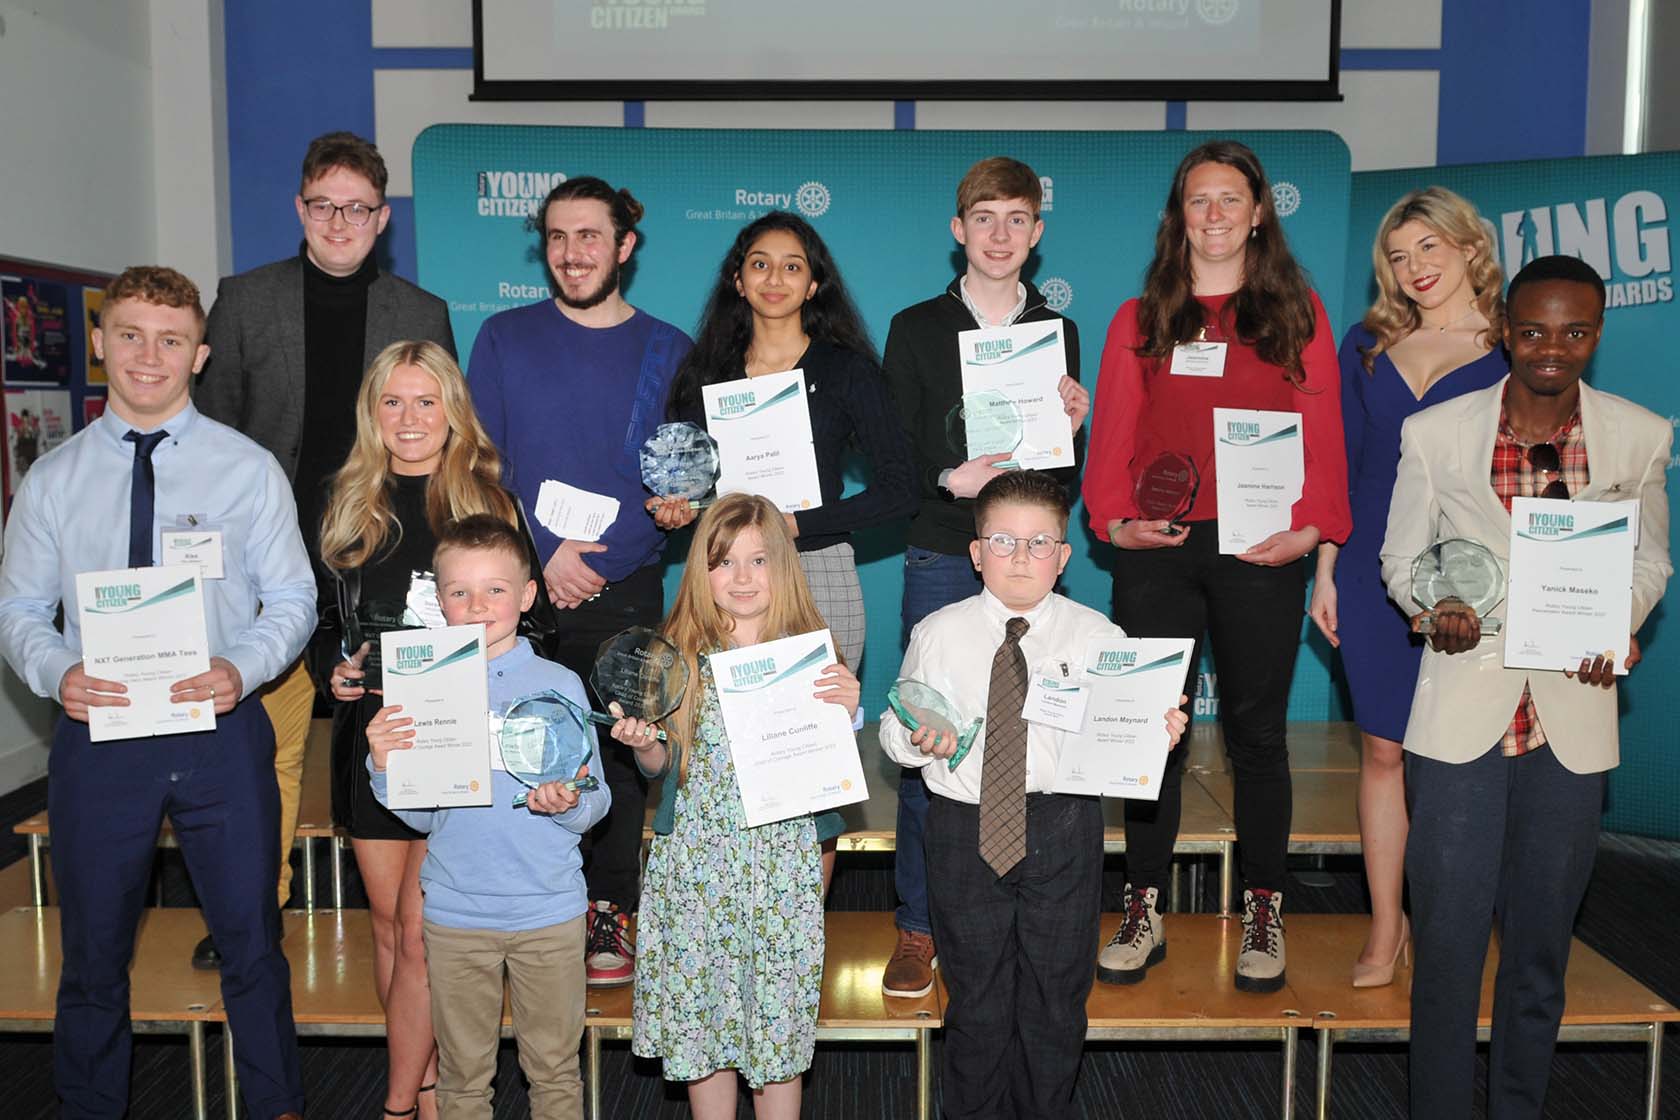 Rotary Young Citizen Award winners 2023